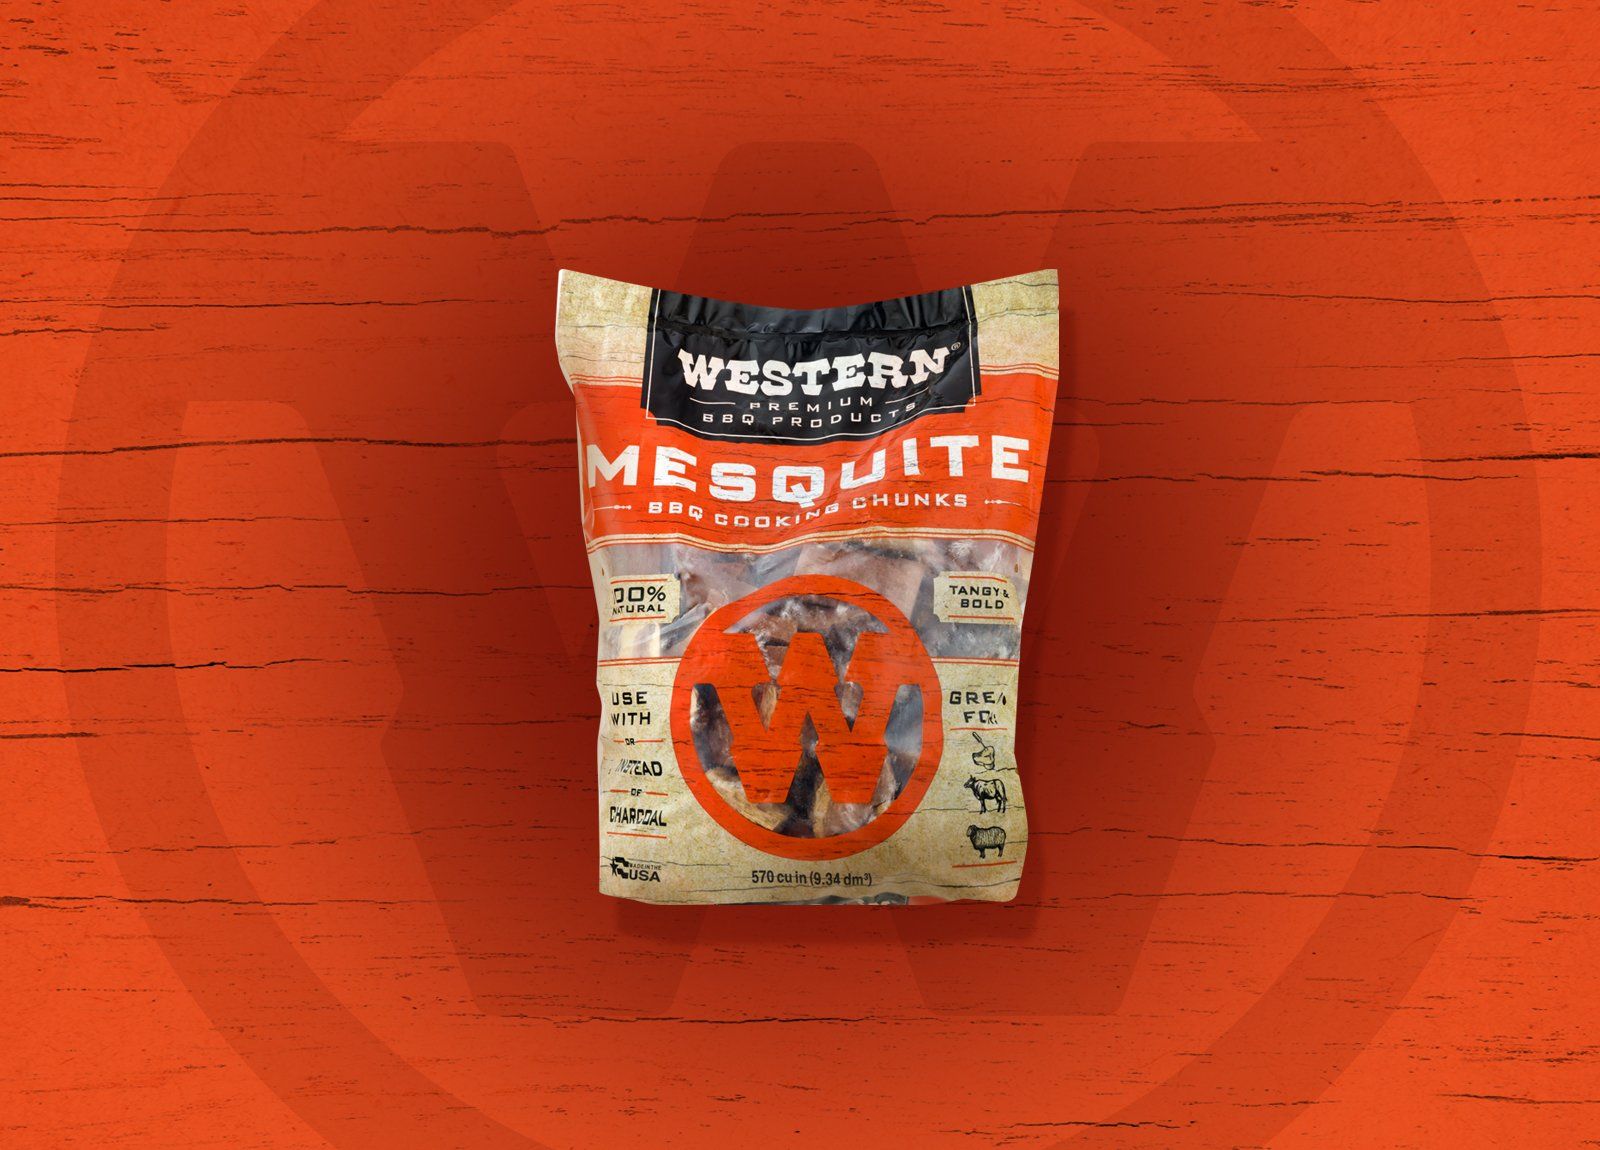 A bag of Western Mesquite BBQ Cooking Chunks